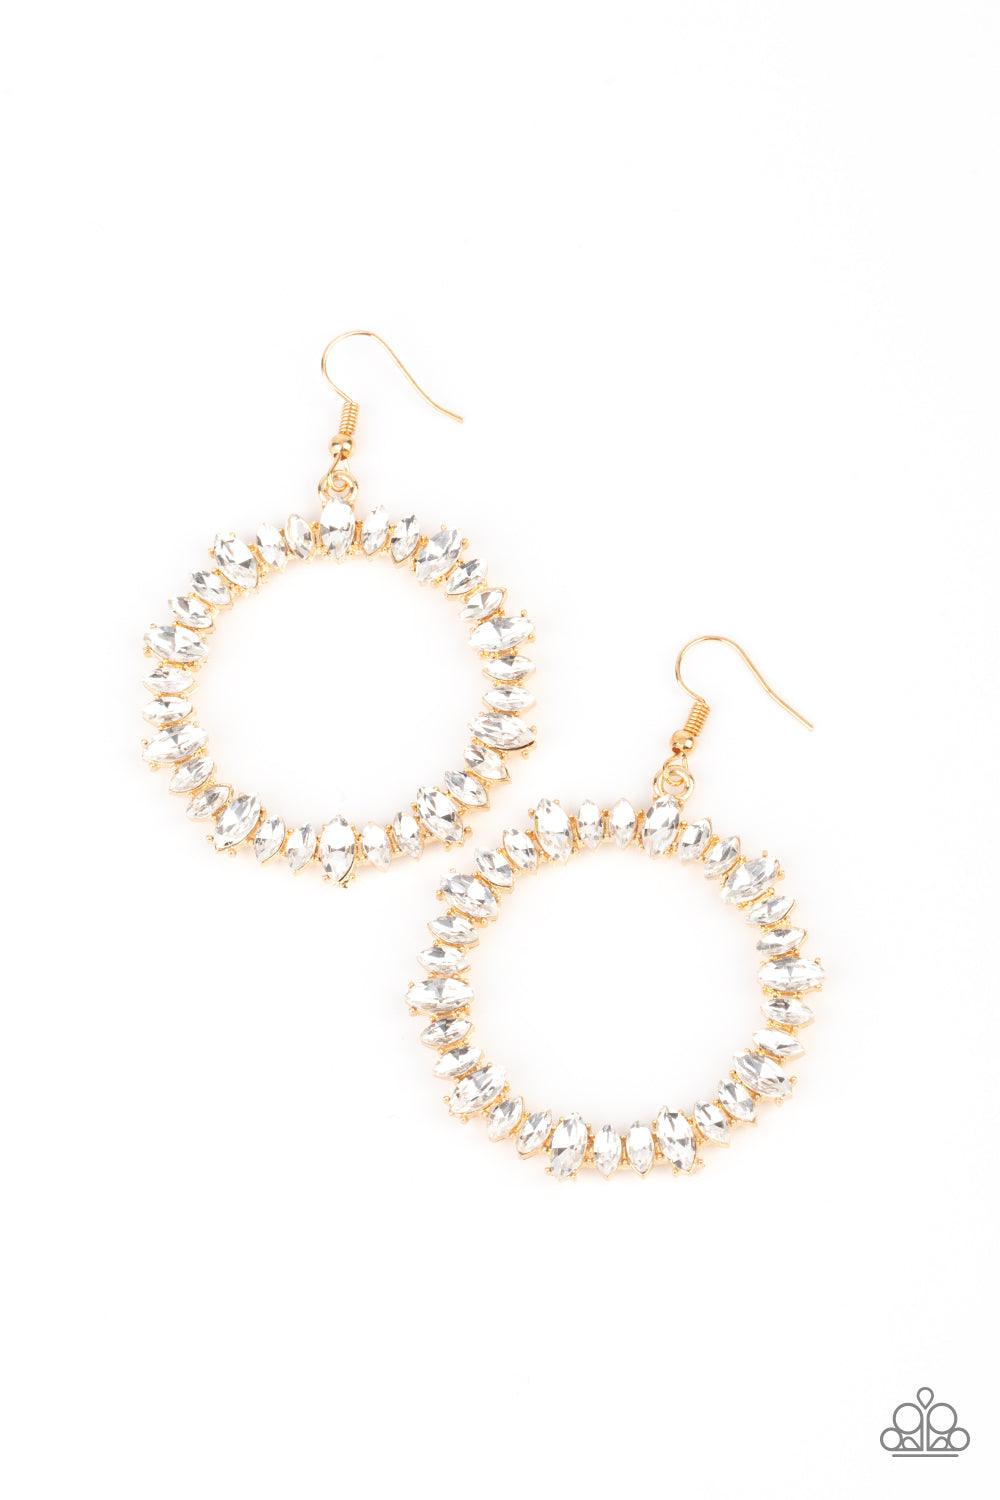 Paparazzi Accessories Glowing Reviews - Gold Encased in gold pronged fittings, an incandescent array of white marquise cut rhinestones delicately coalesce into a glowing hoop. Earring attaches to a standard fishhook fitting. Sold as one pair of earrings.